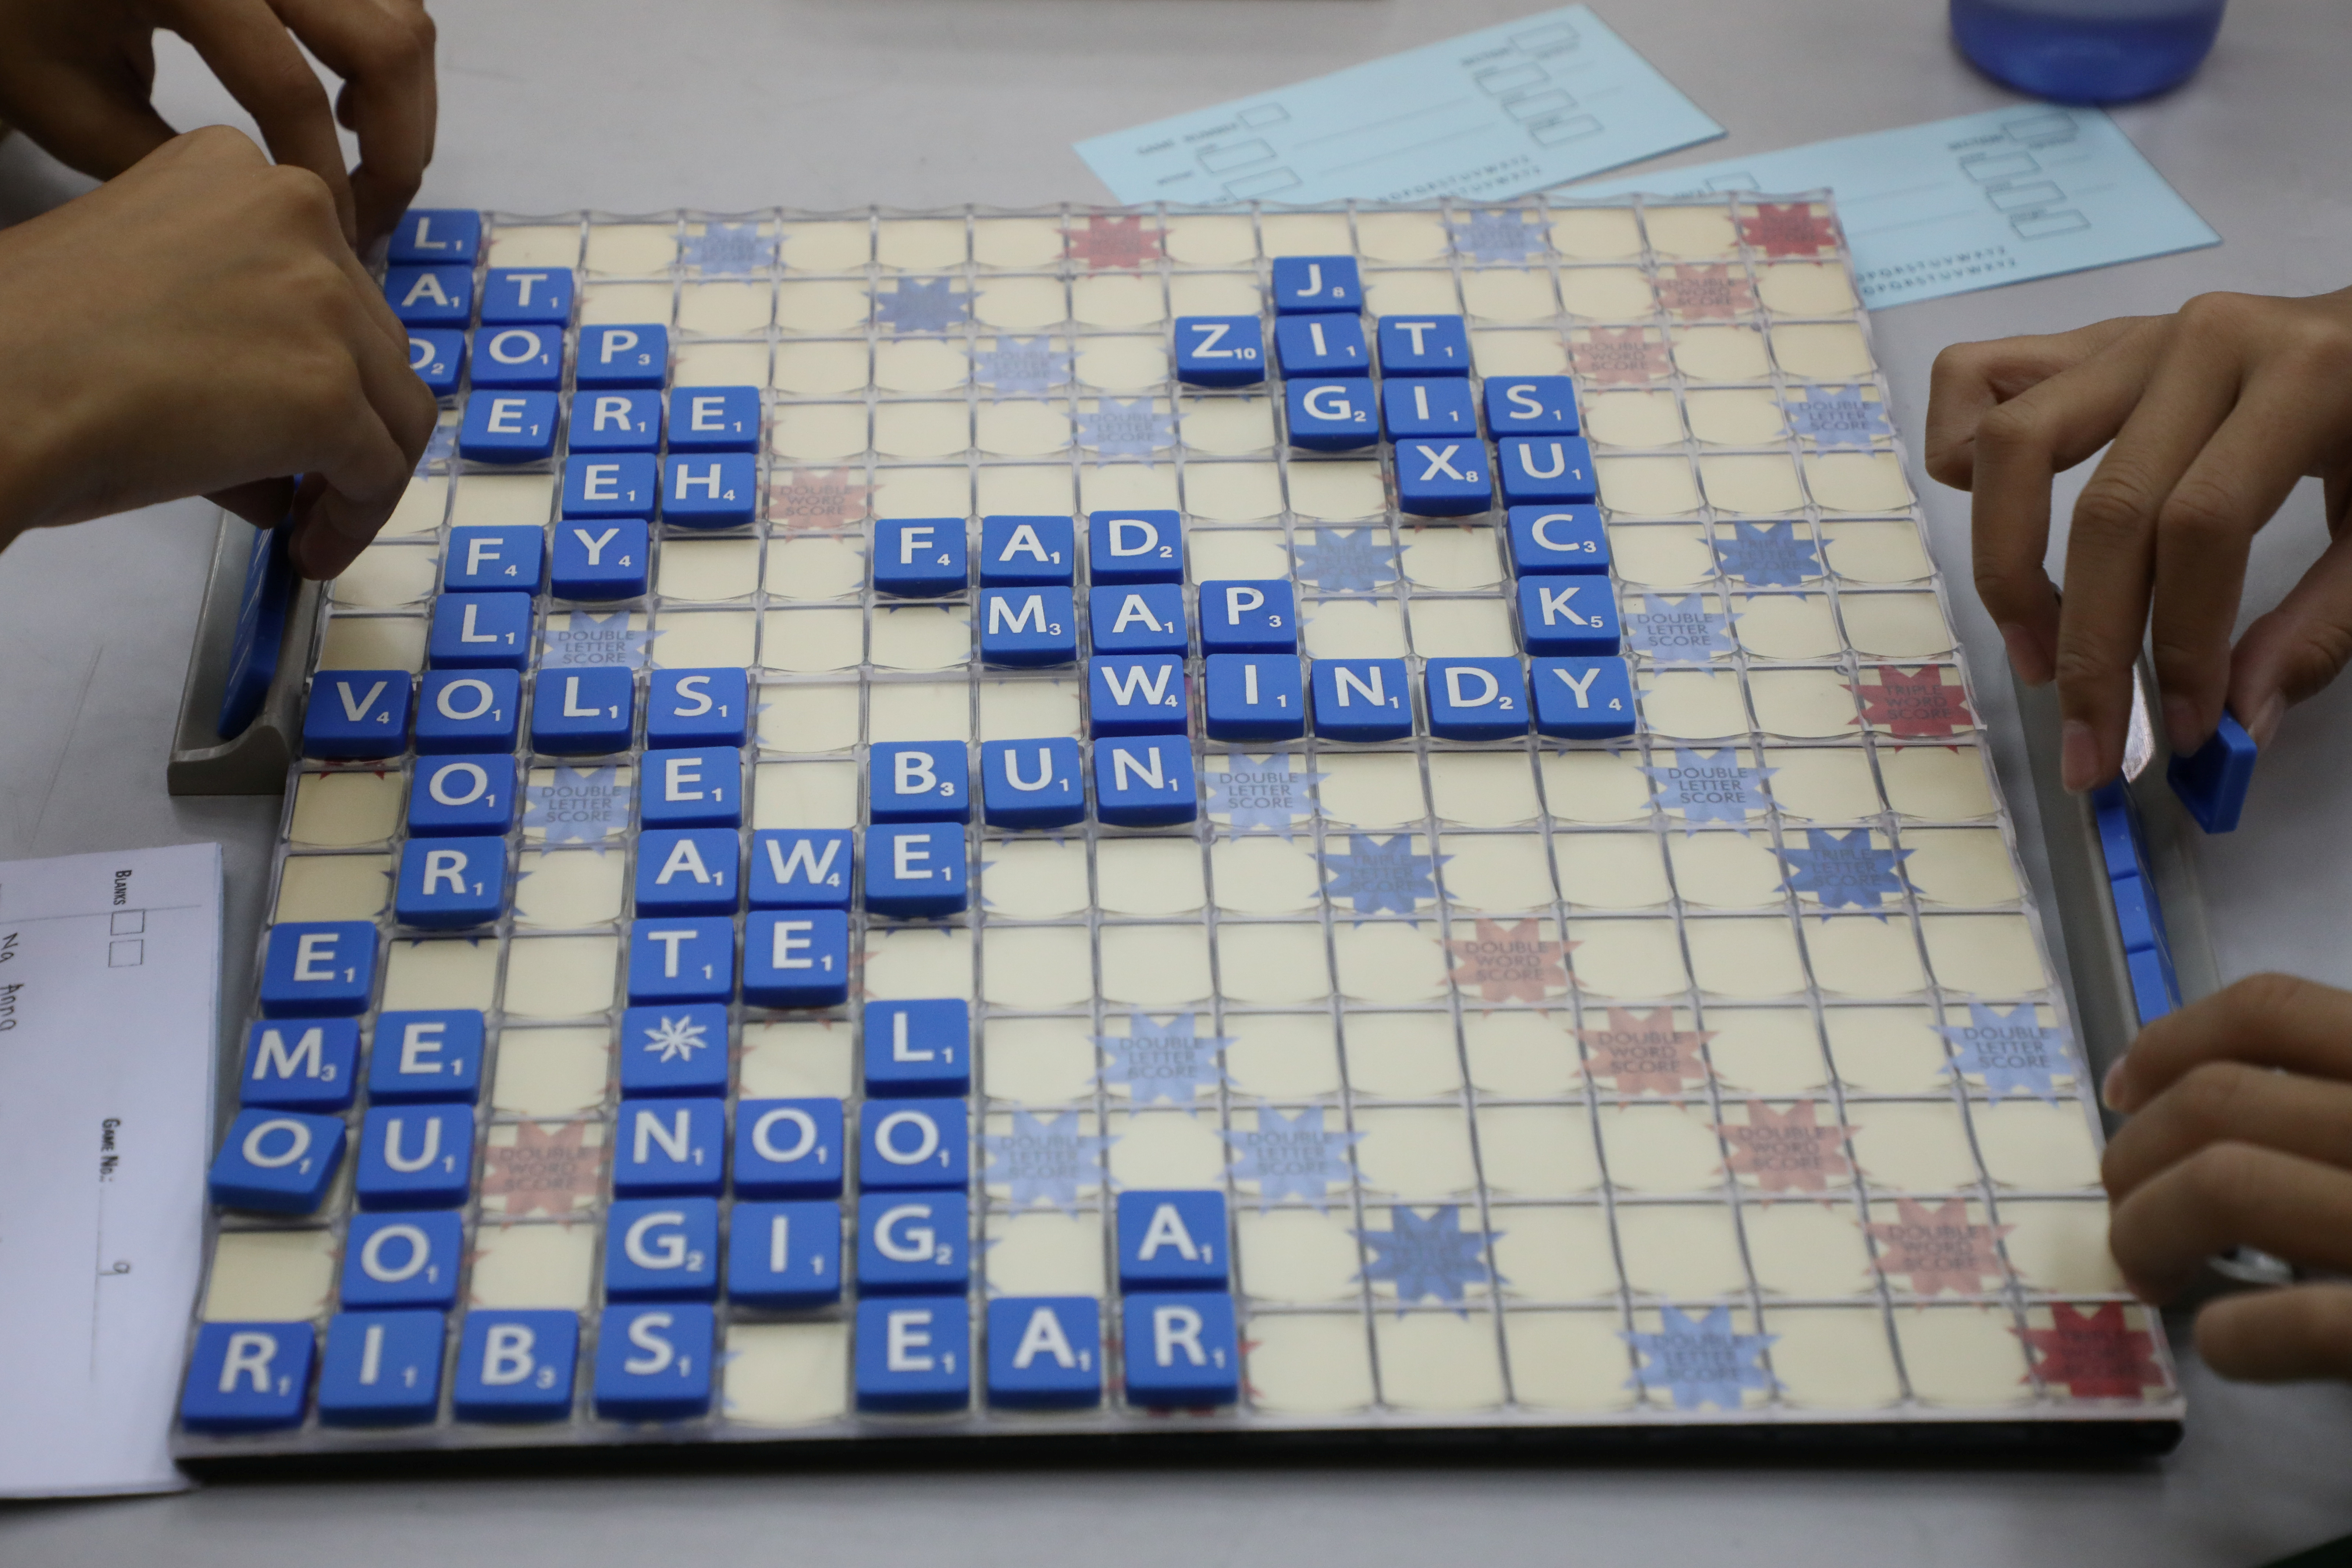 The players play Scrabble in the WESPA Youth Cup 2019 in Kuala Lumpur, Malaysia, on November 30, 2019. Image taken on November 30, 2019. REUTERS/Lim Huey Teng